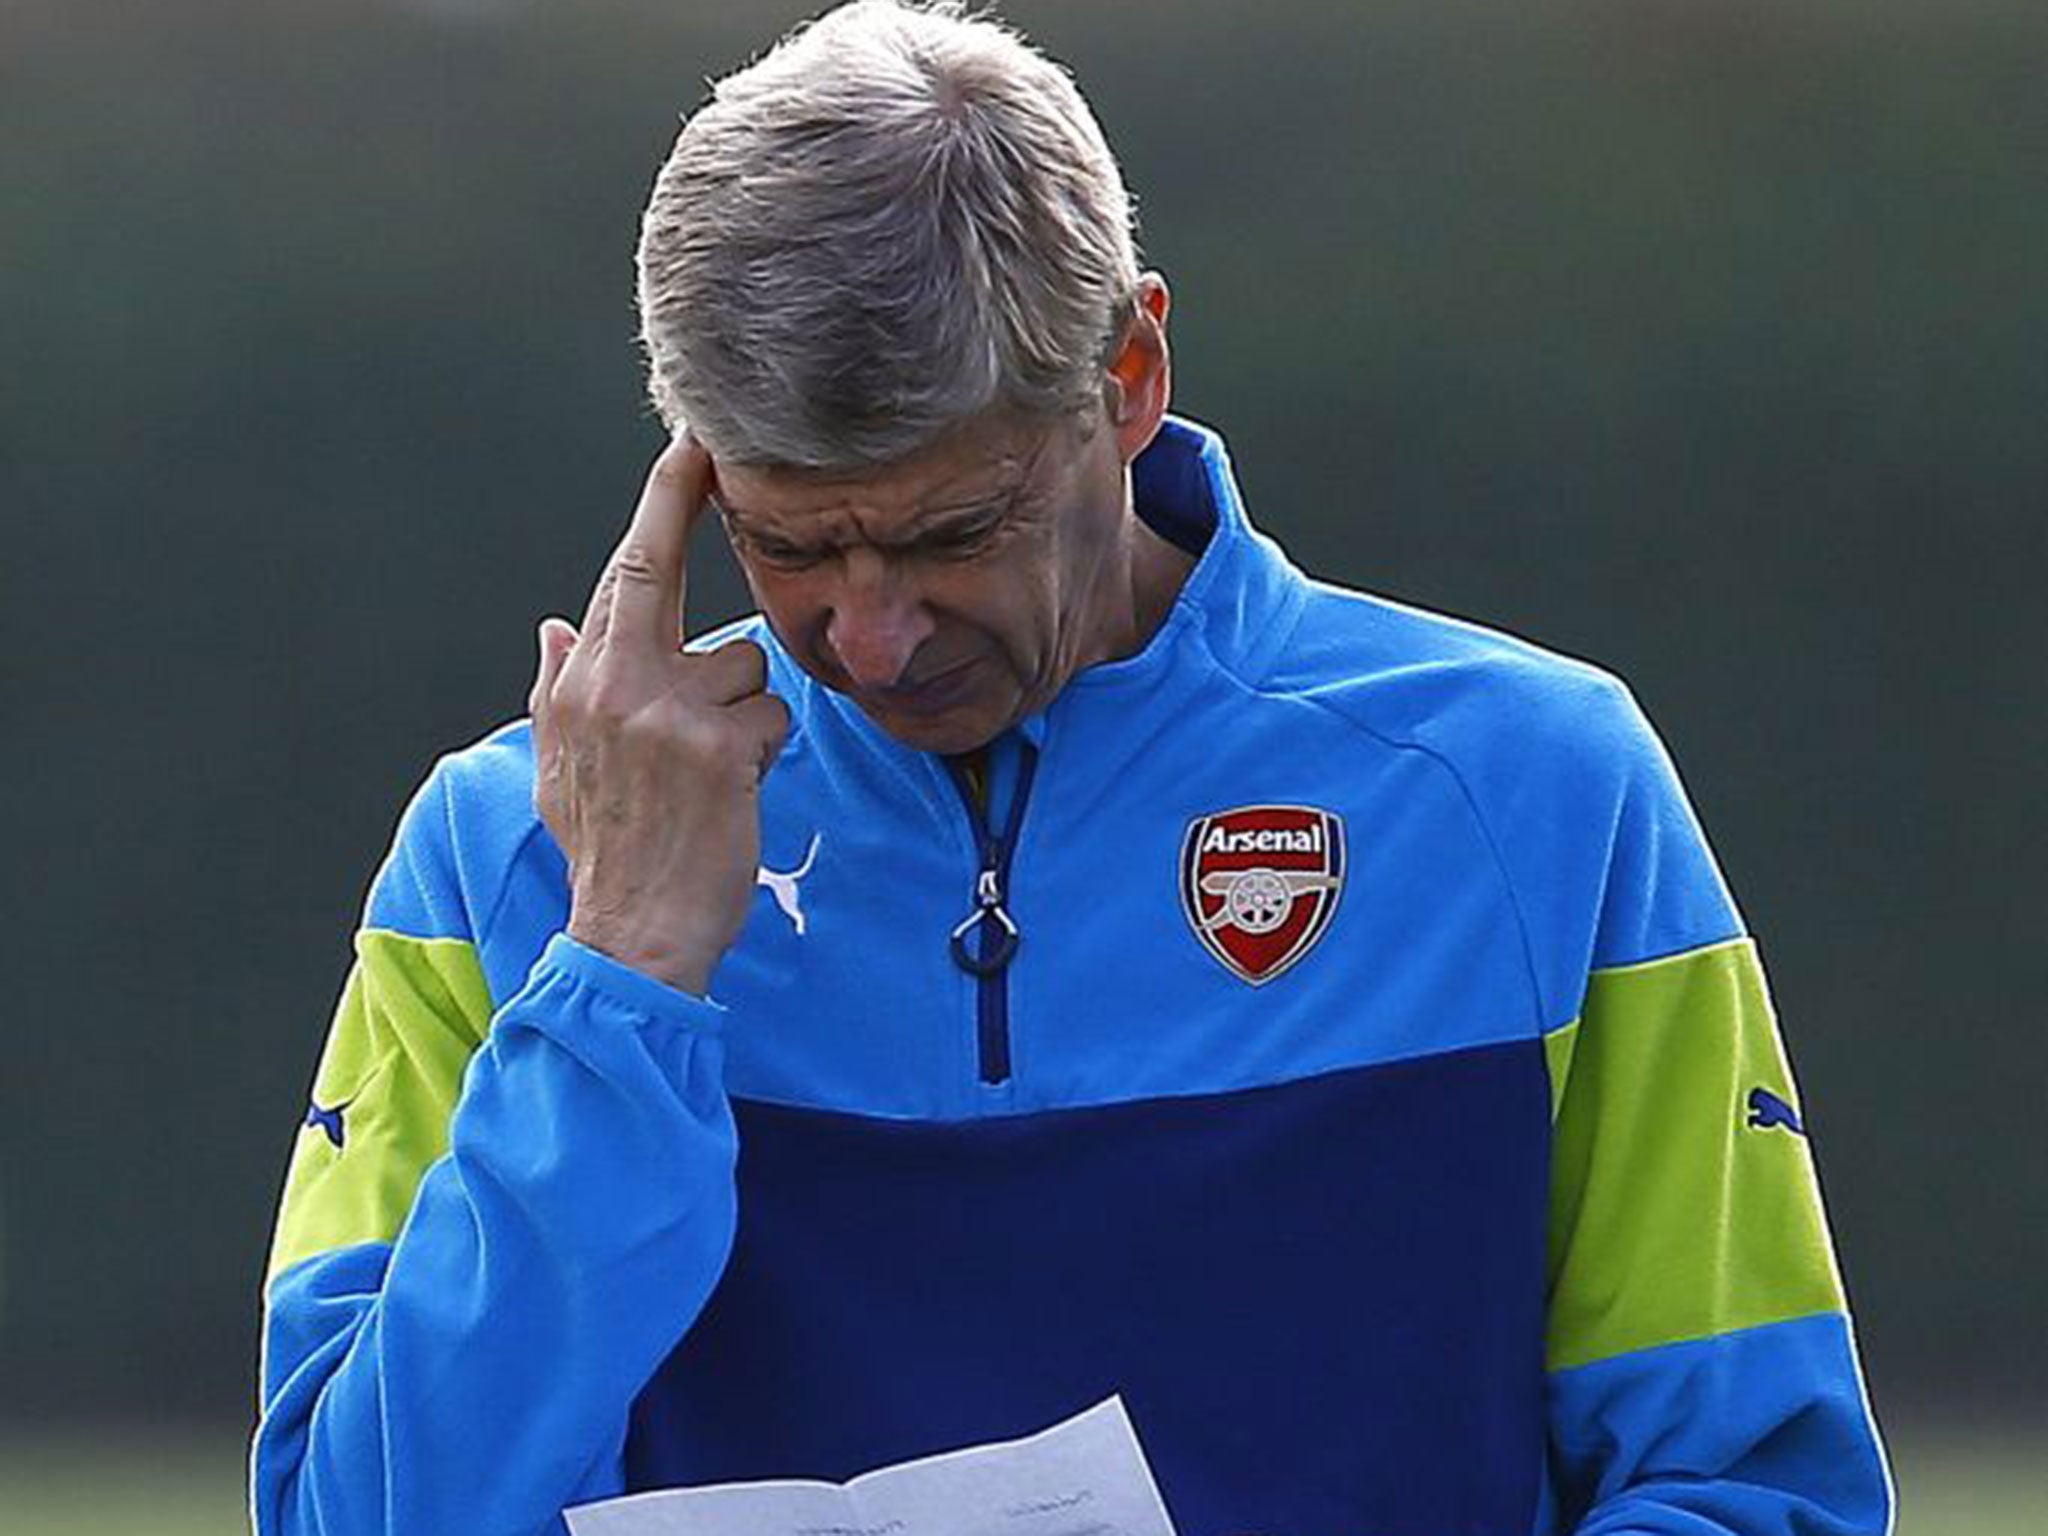 Arsene Wenger has much to think about during training today